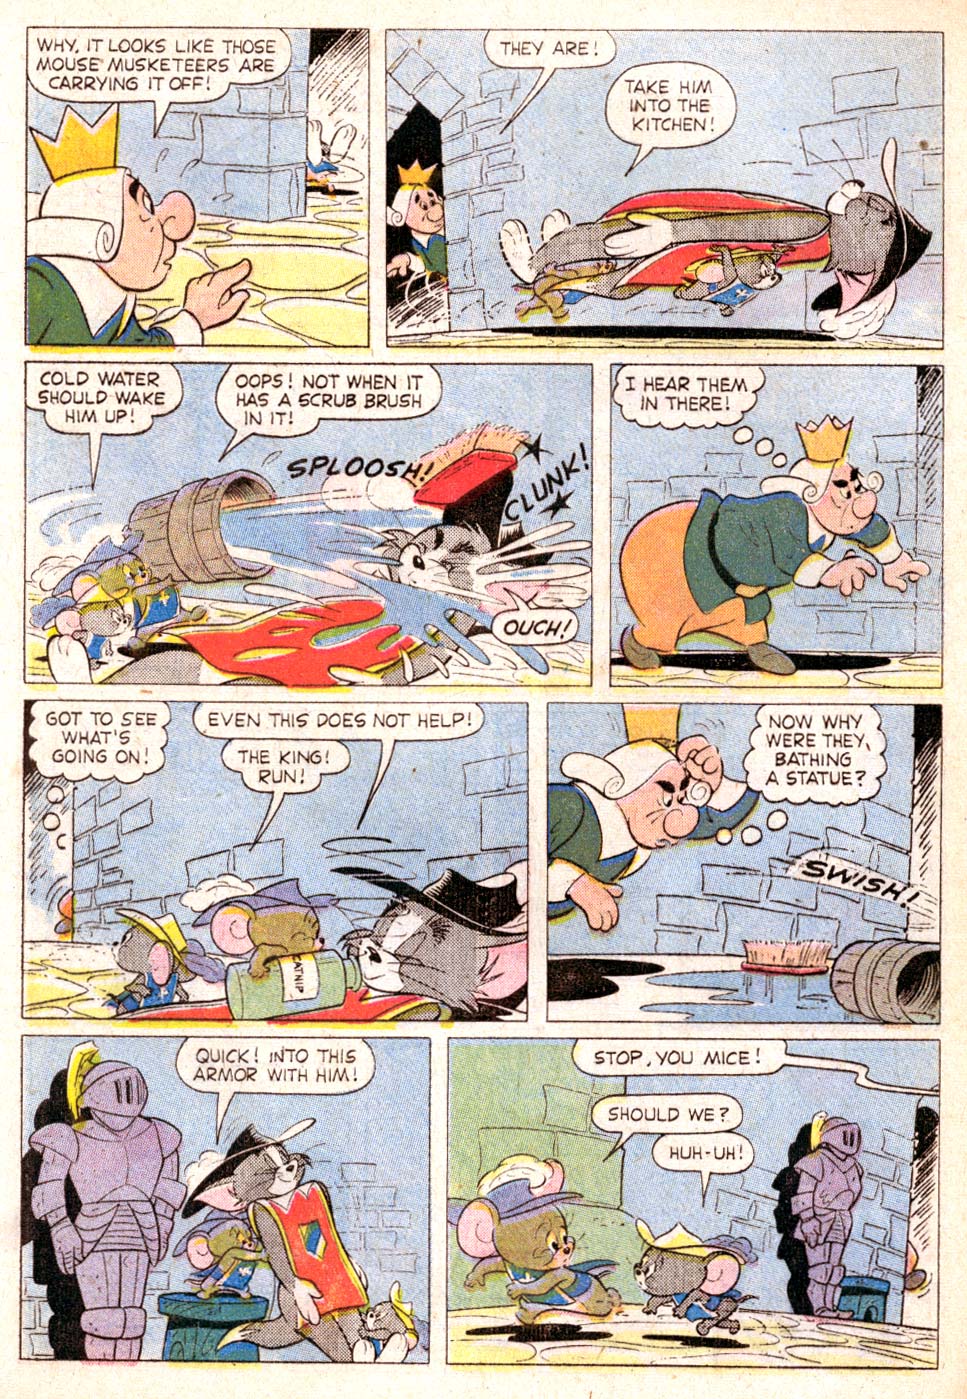 Read online M.G.M's The Mouse Musketeers comic -  Issue #17 - 8